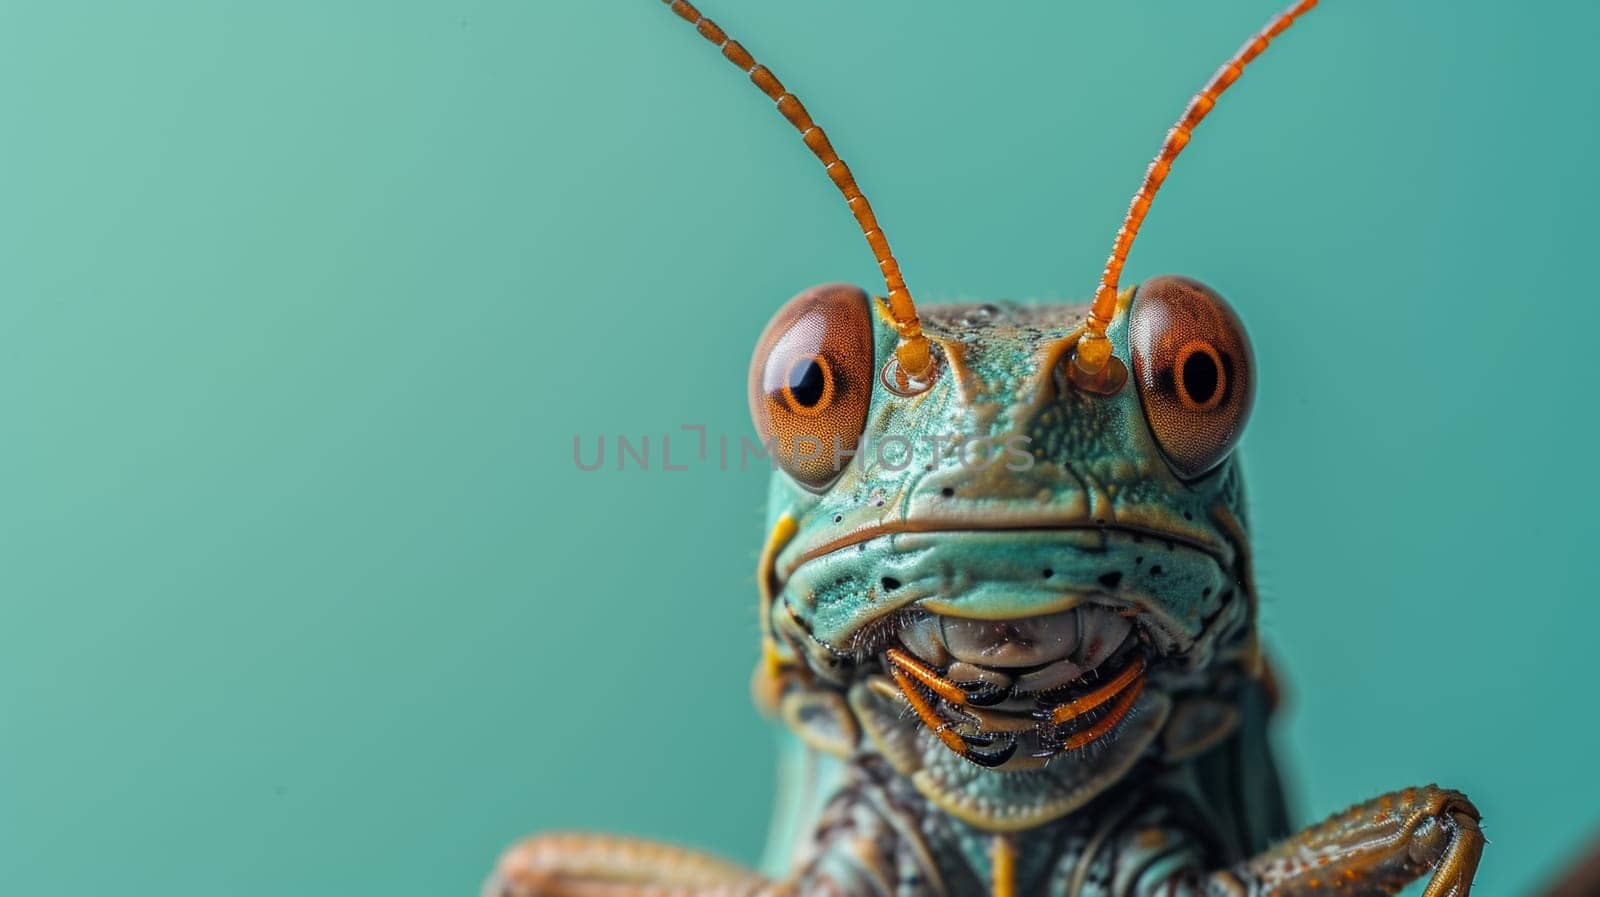 A close up of a grasshopper with orange eyes and antennae